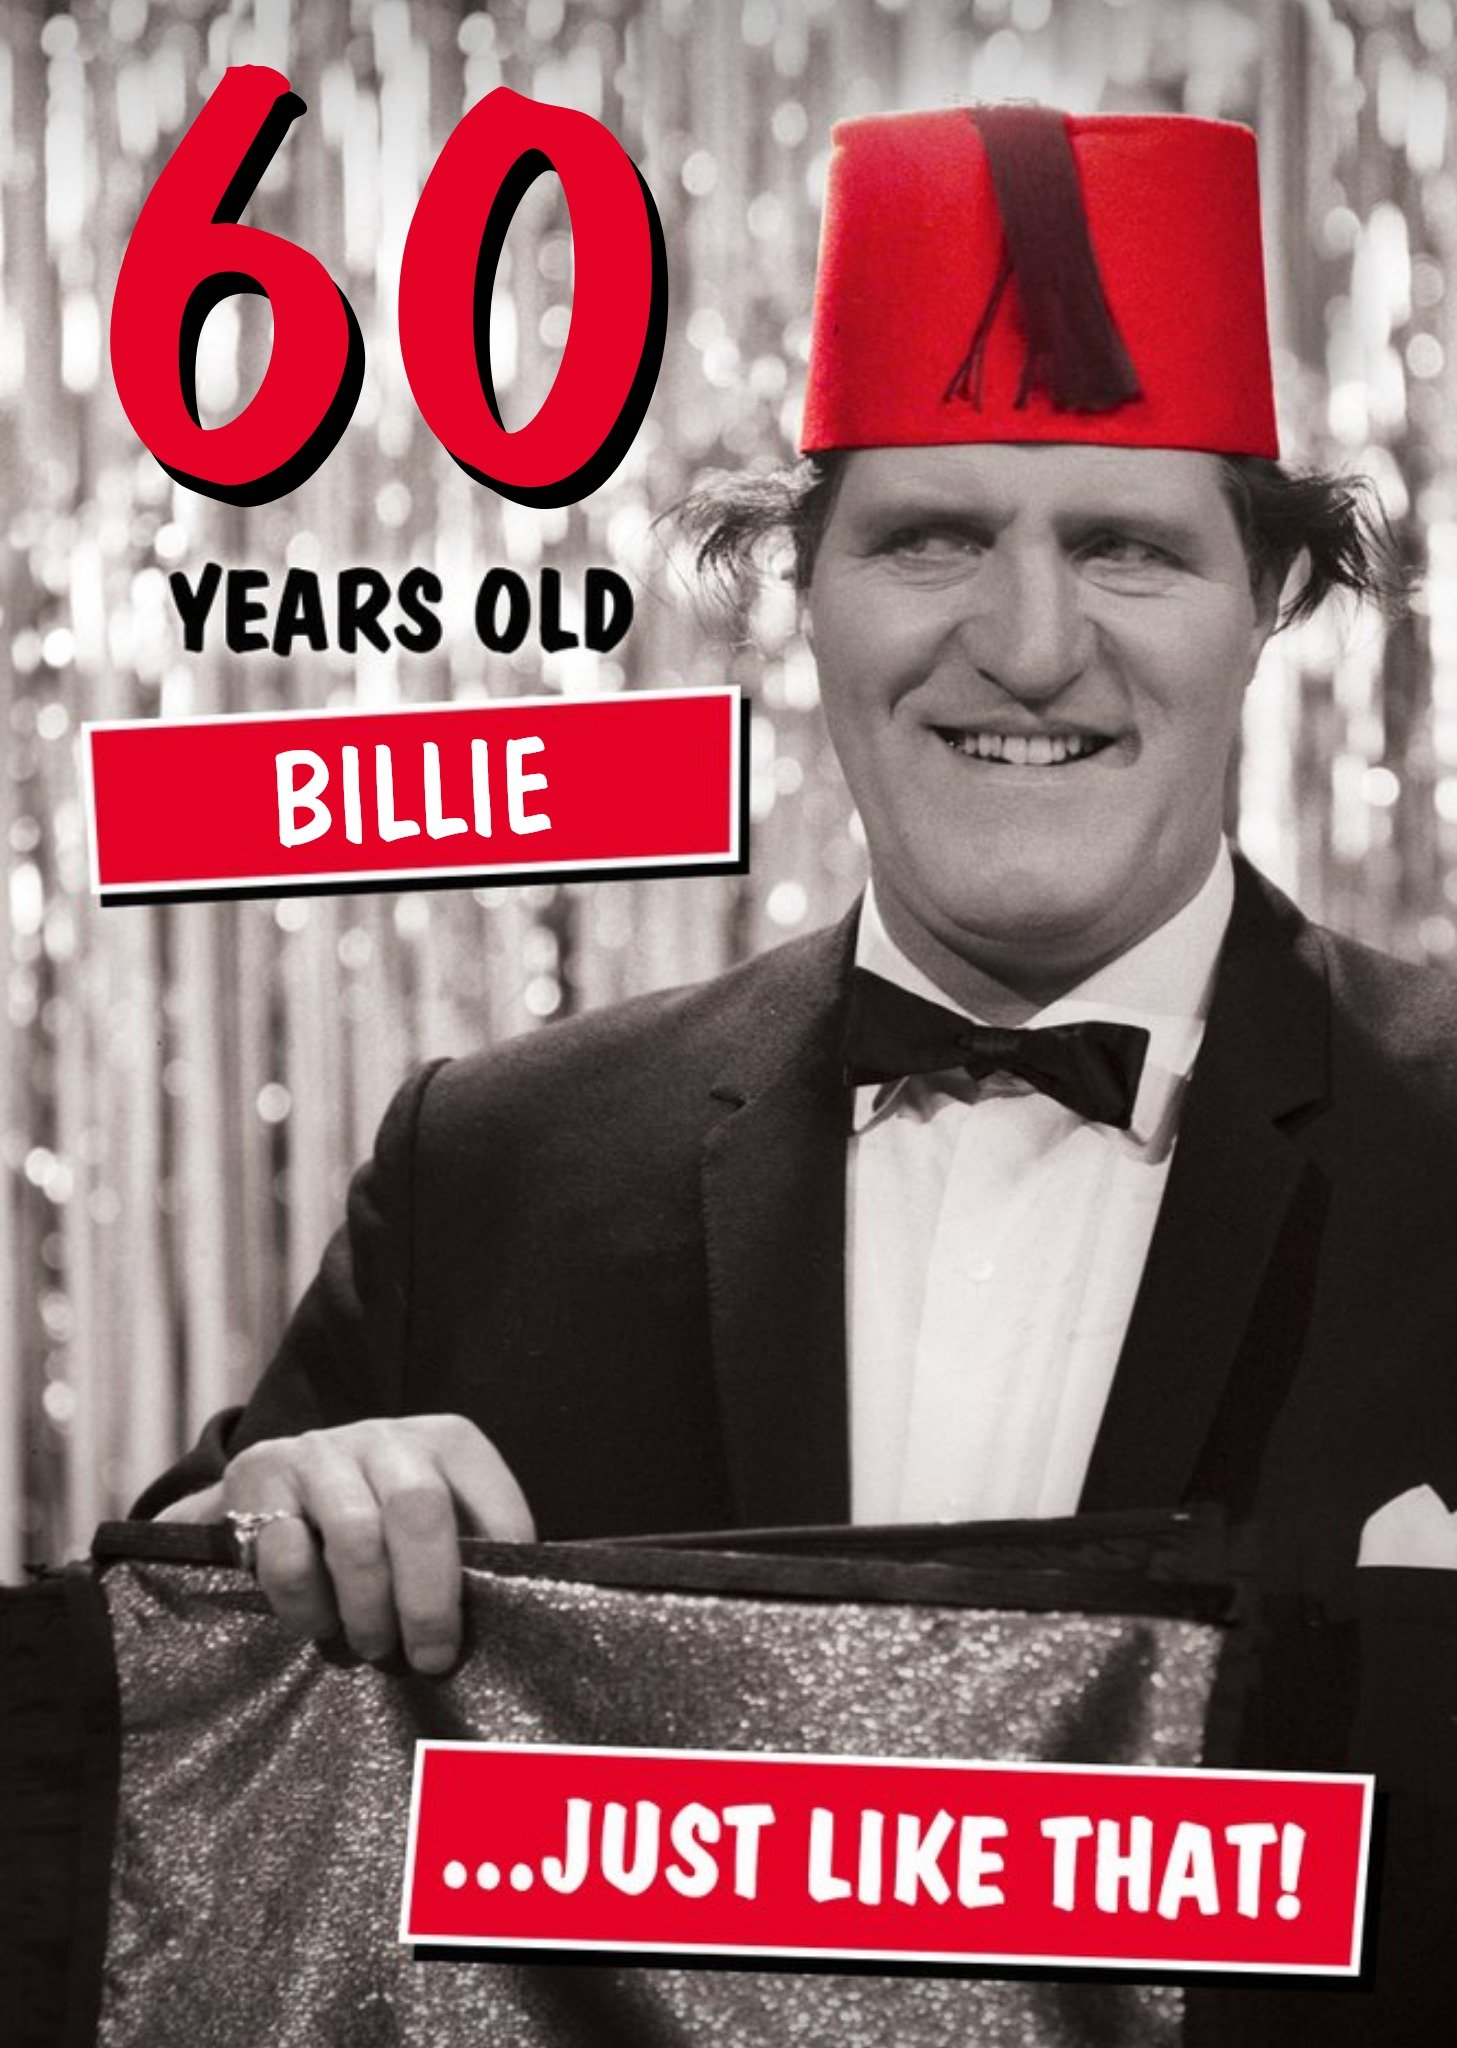 Other Funny Danilo Tommy Cooper 60th Birthday Card, Large